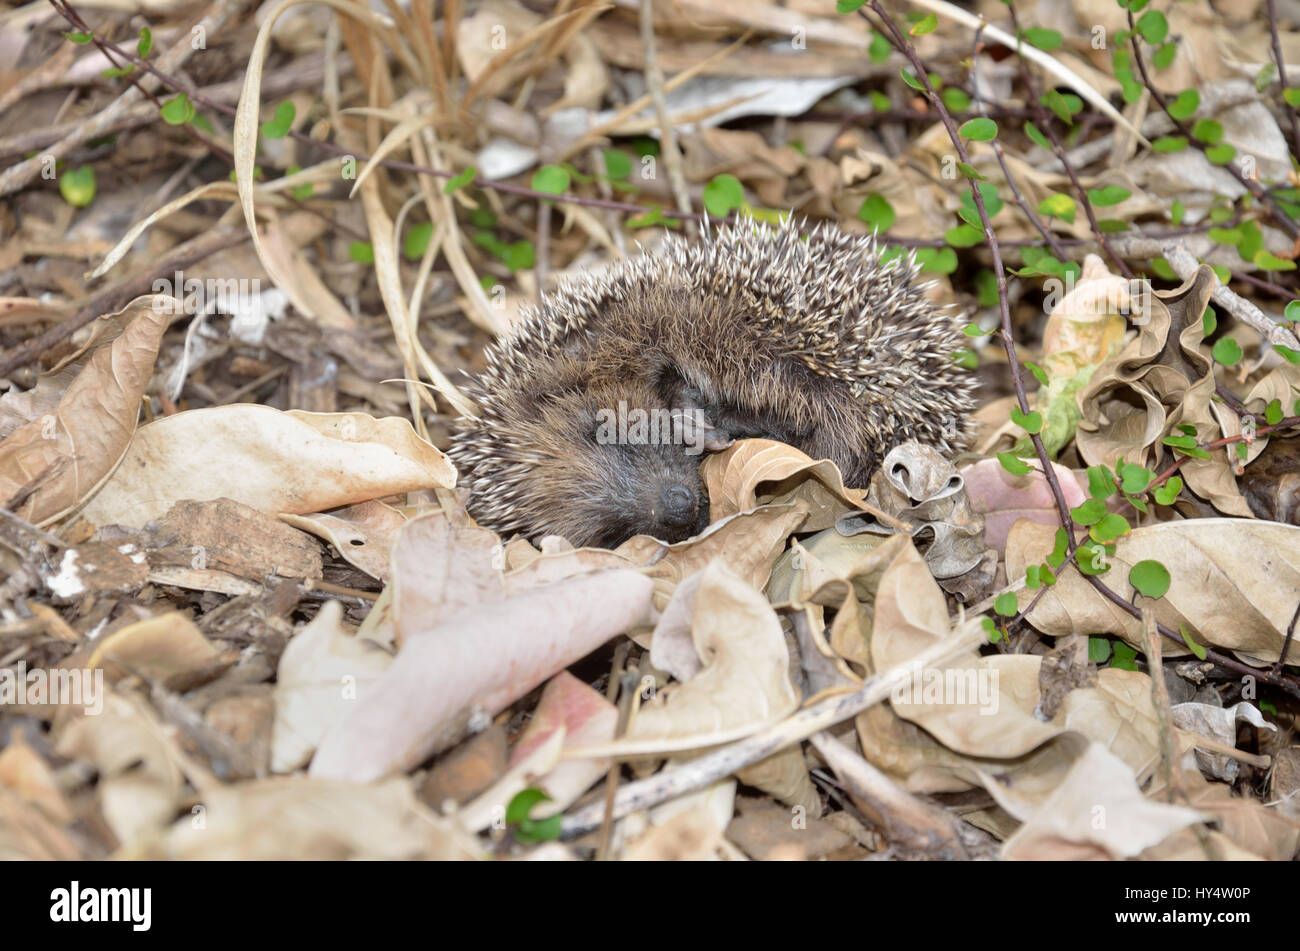 A young hedgehog plays possum after being disturbed in the garden Stock Photo